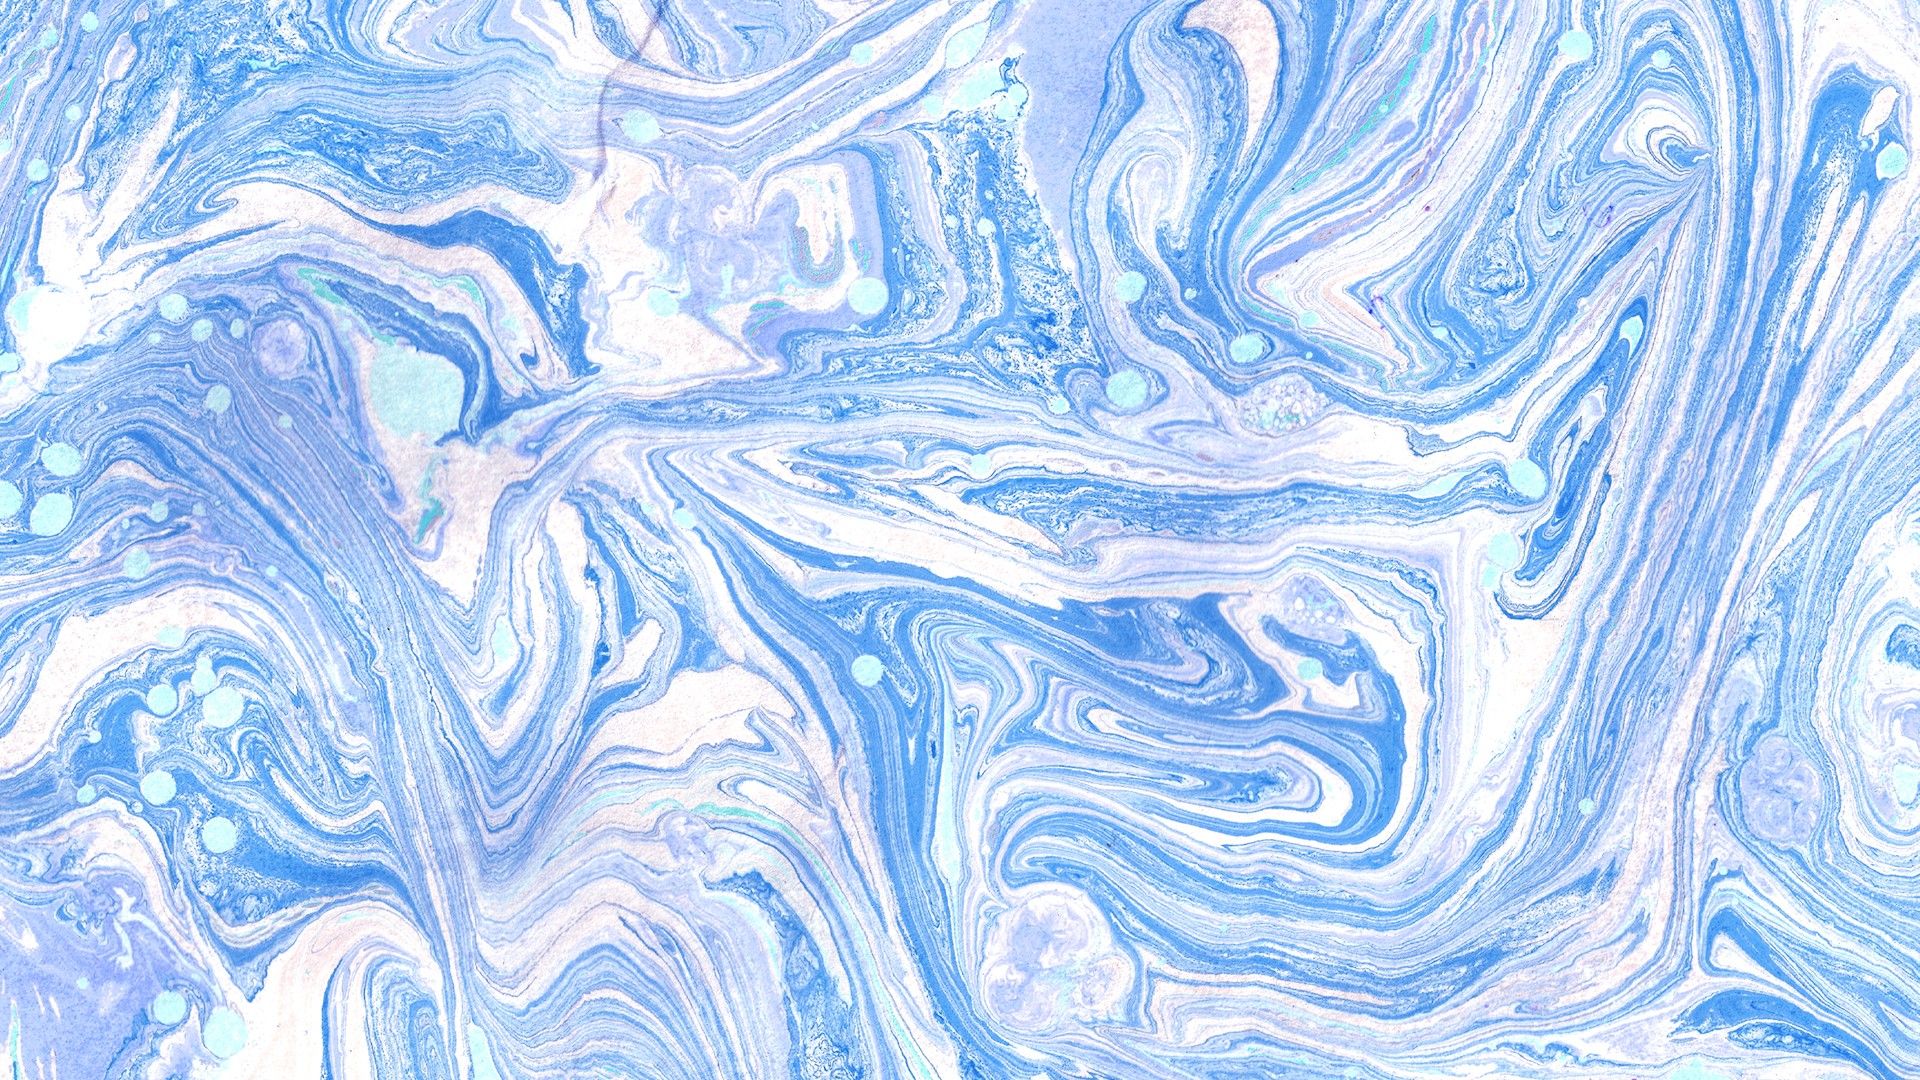 Light Blue Marble Wallpapers